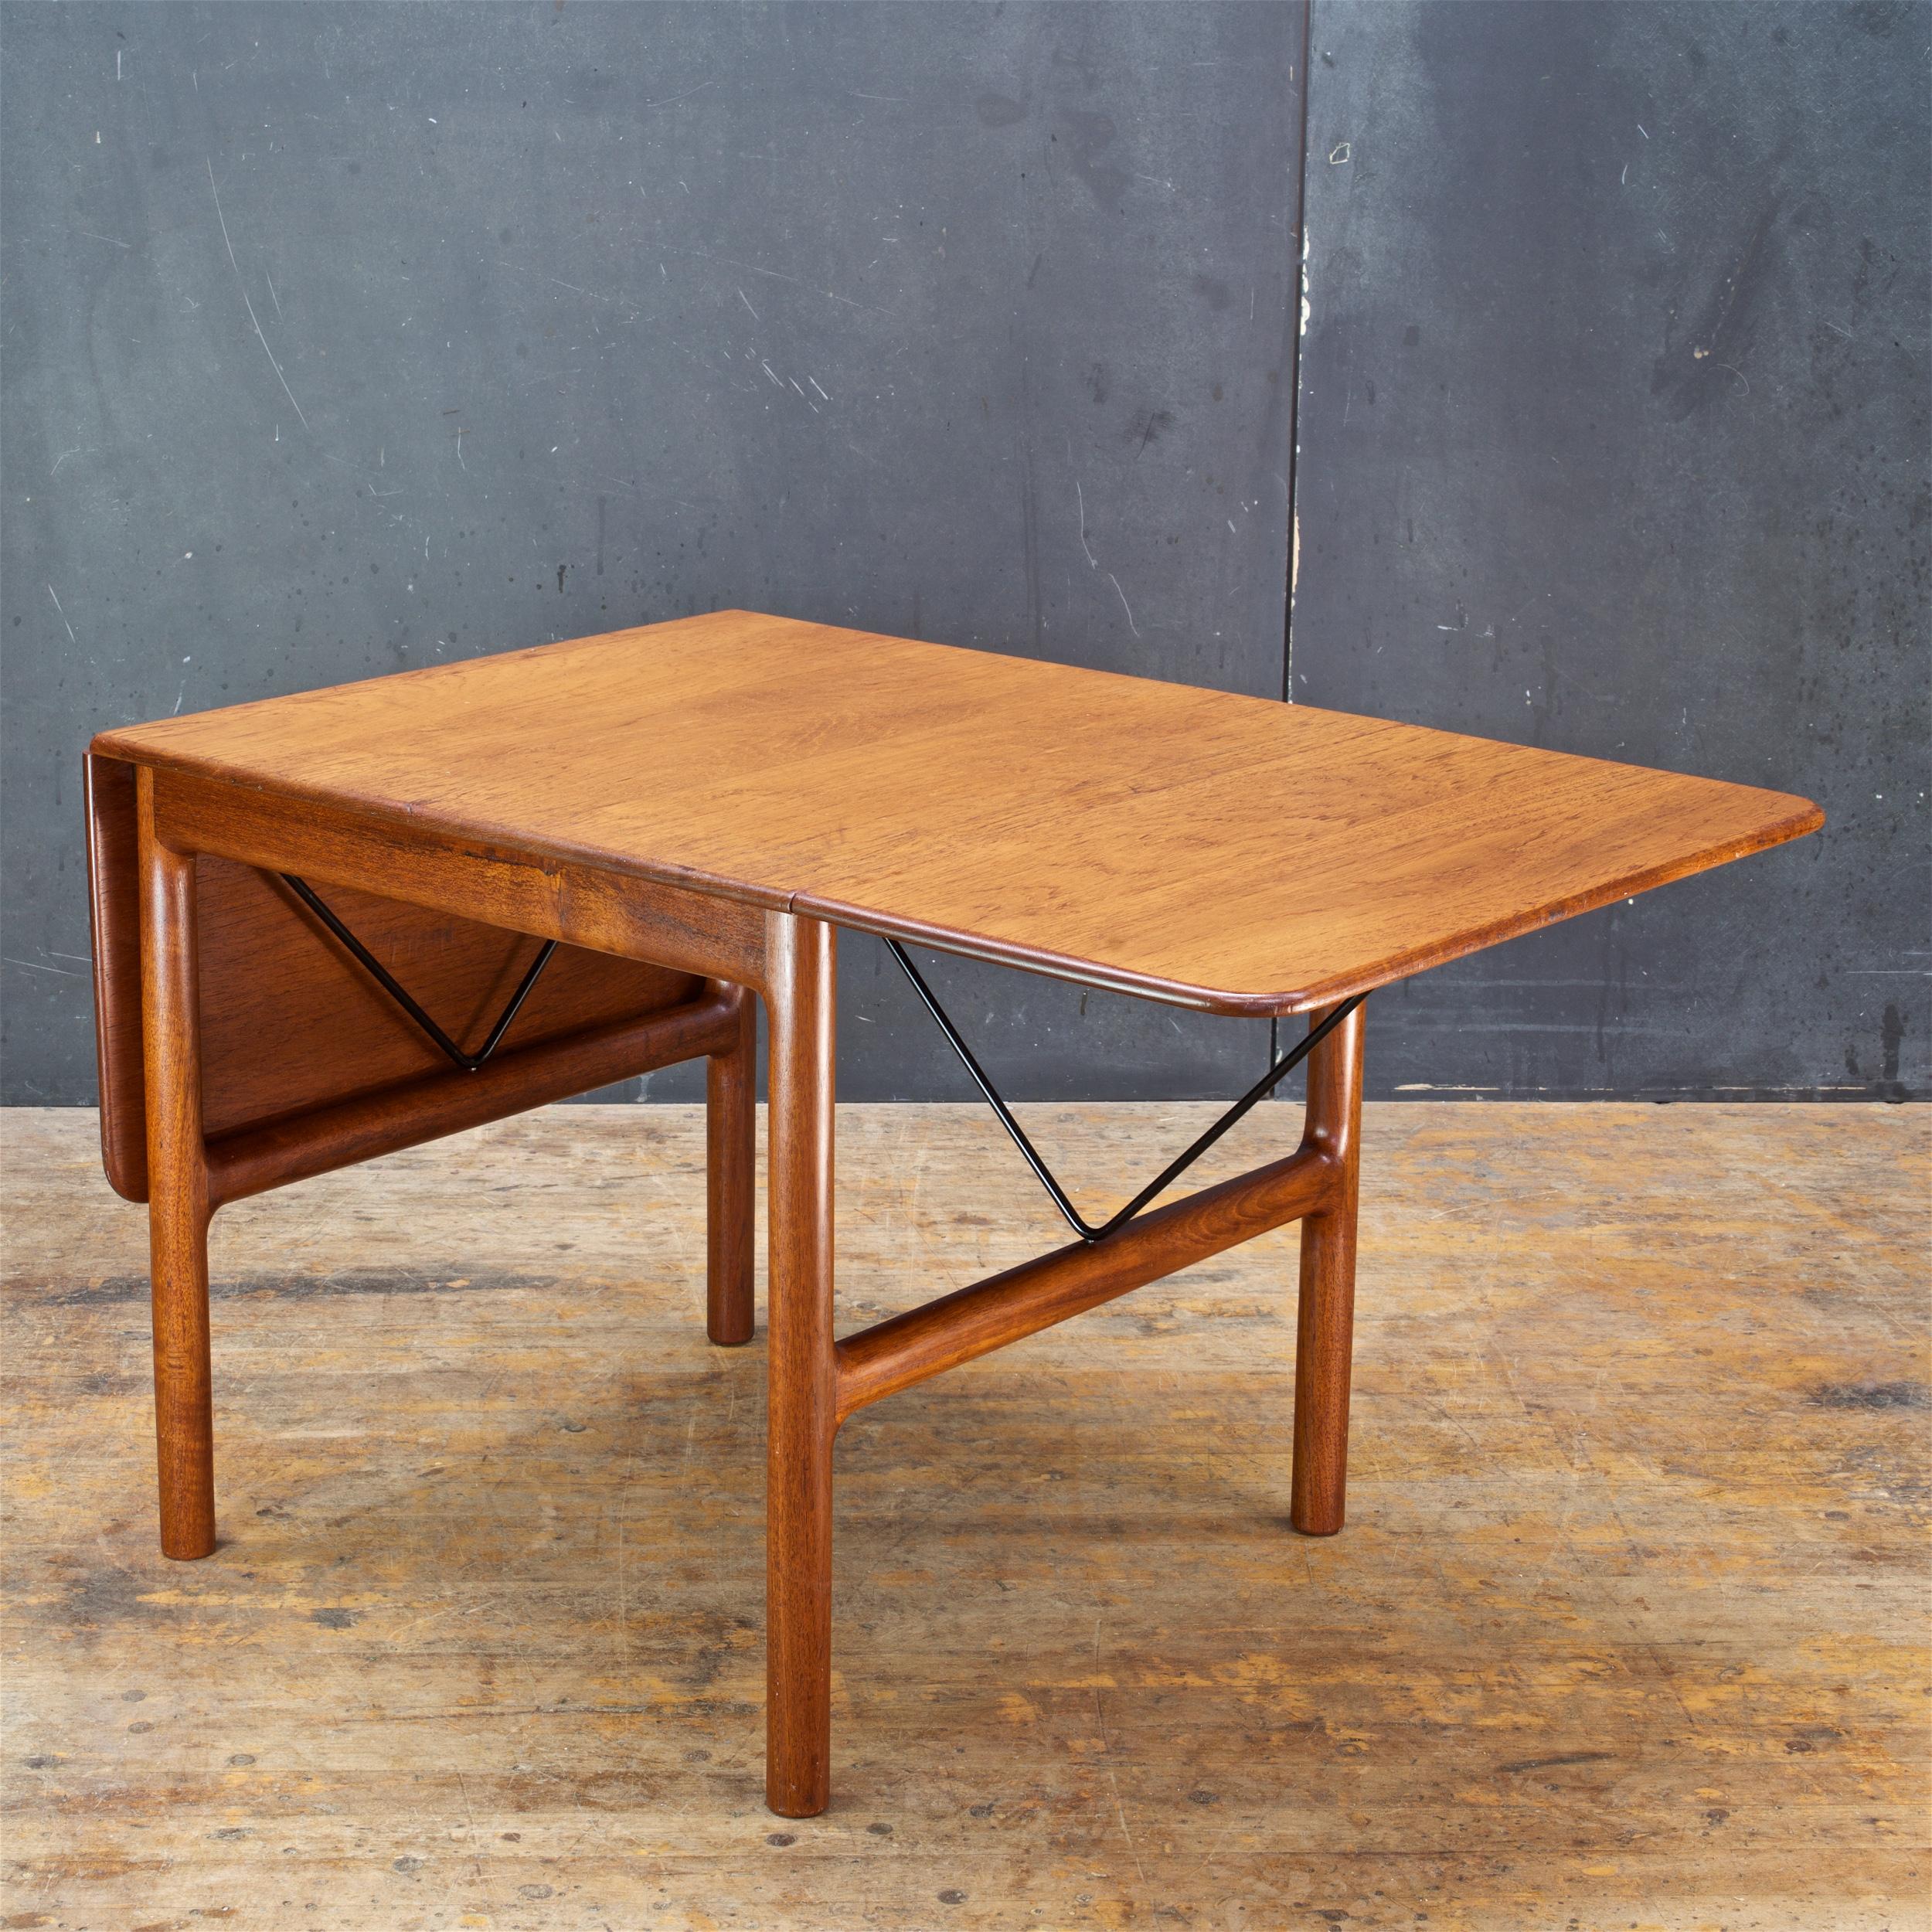 Mid-20th Century 1950s Danish Architects Embassy Drop-Leaf Teak Table in Style of Hans Wegner For Sale